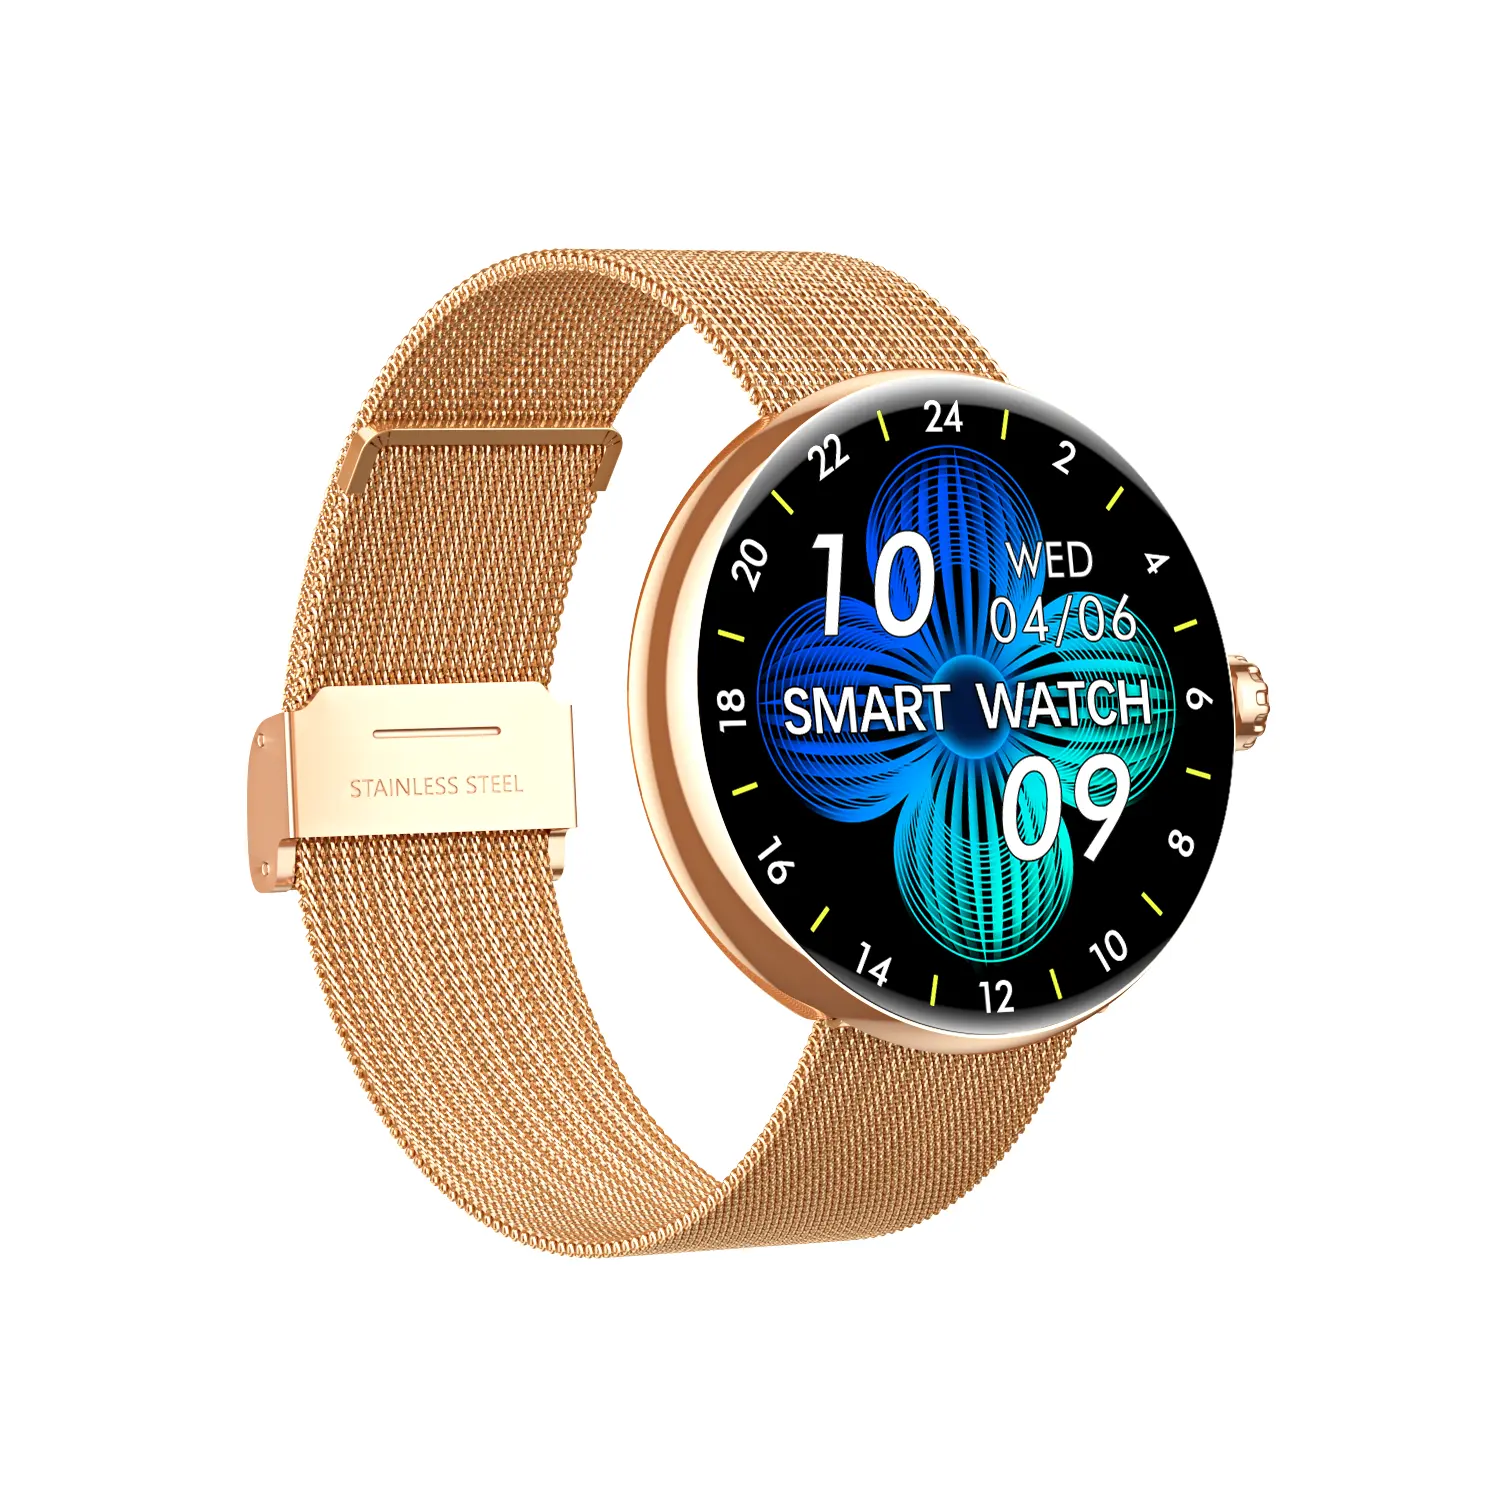 YTGEEHD38最高の中国の心拍数フィットネスAMOLED relojスマートウォッチBT Call AndroidNFC Woman Smartwatch Gold for Android Ios